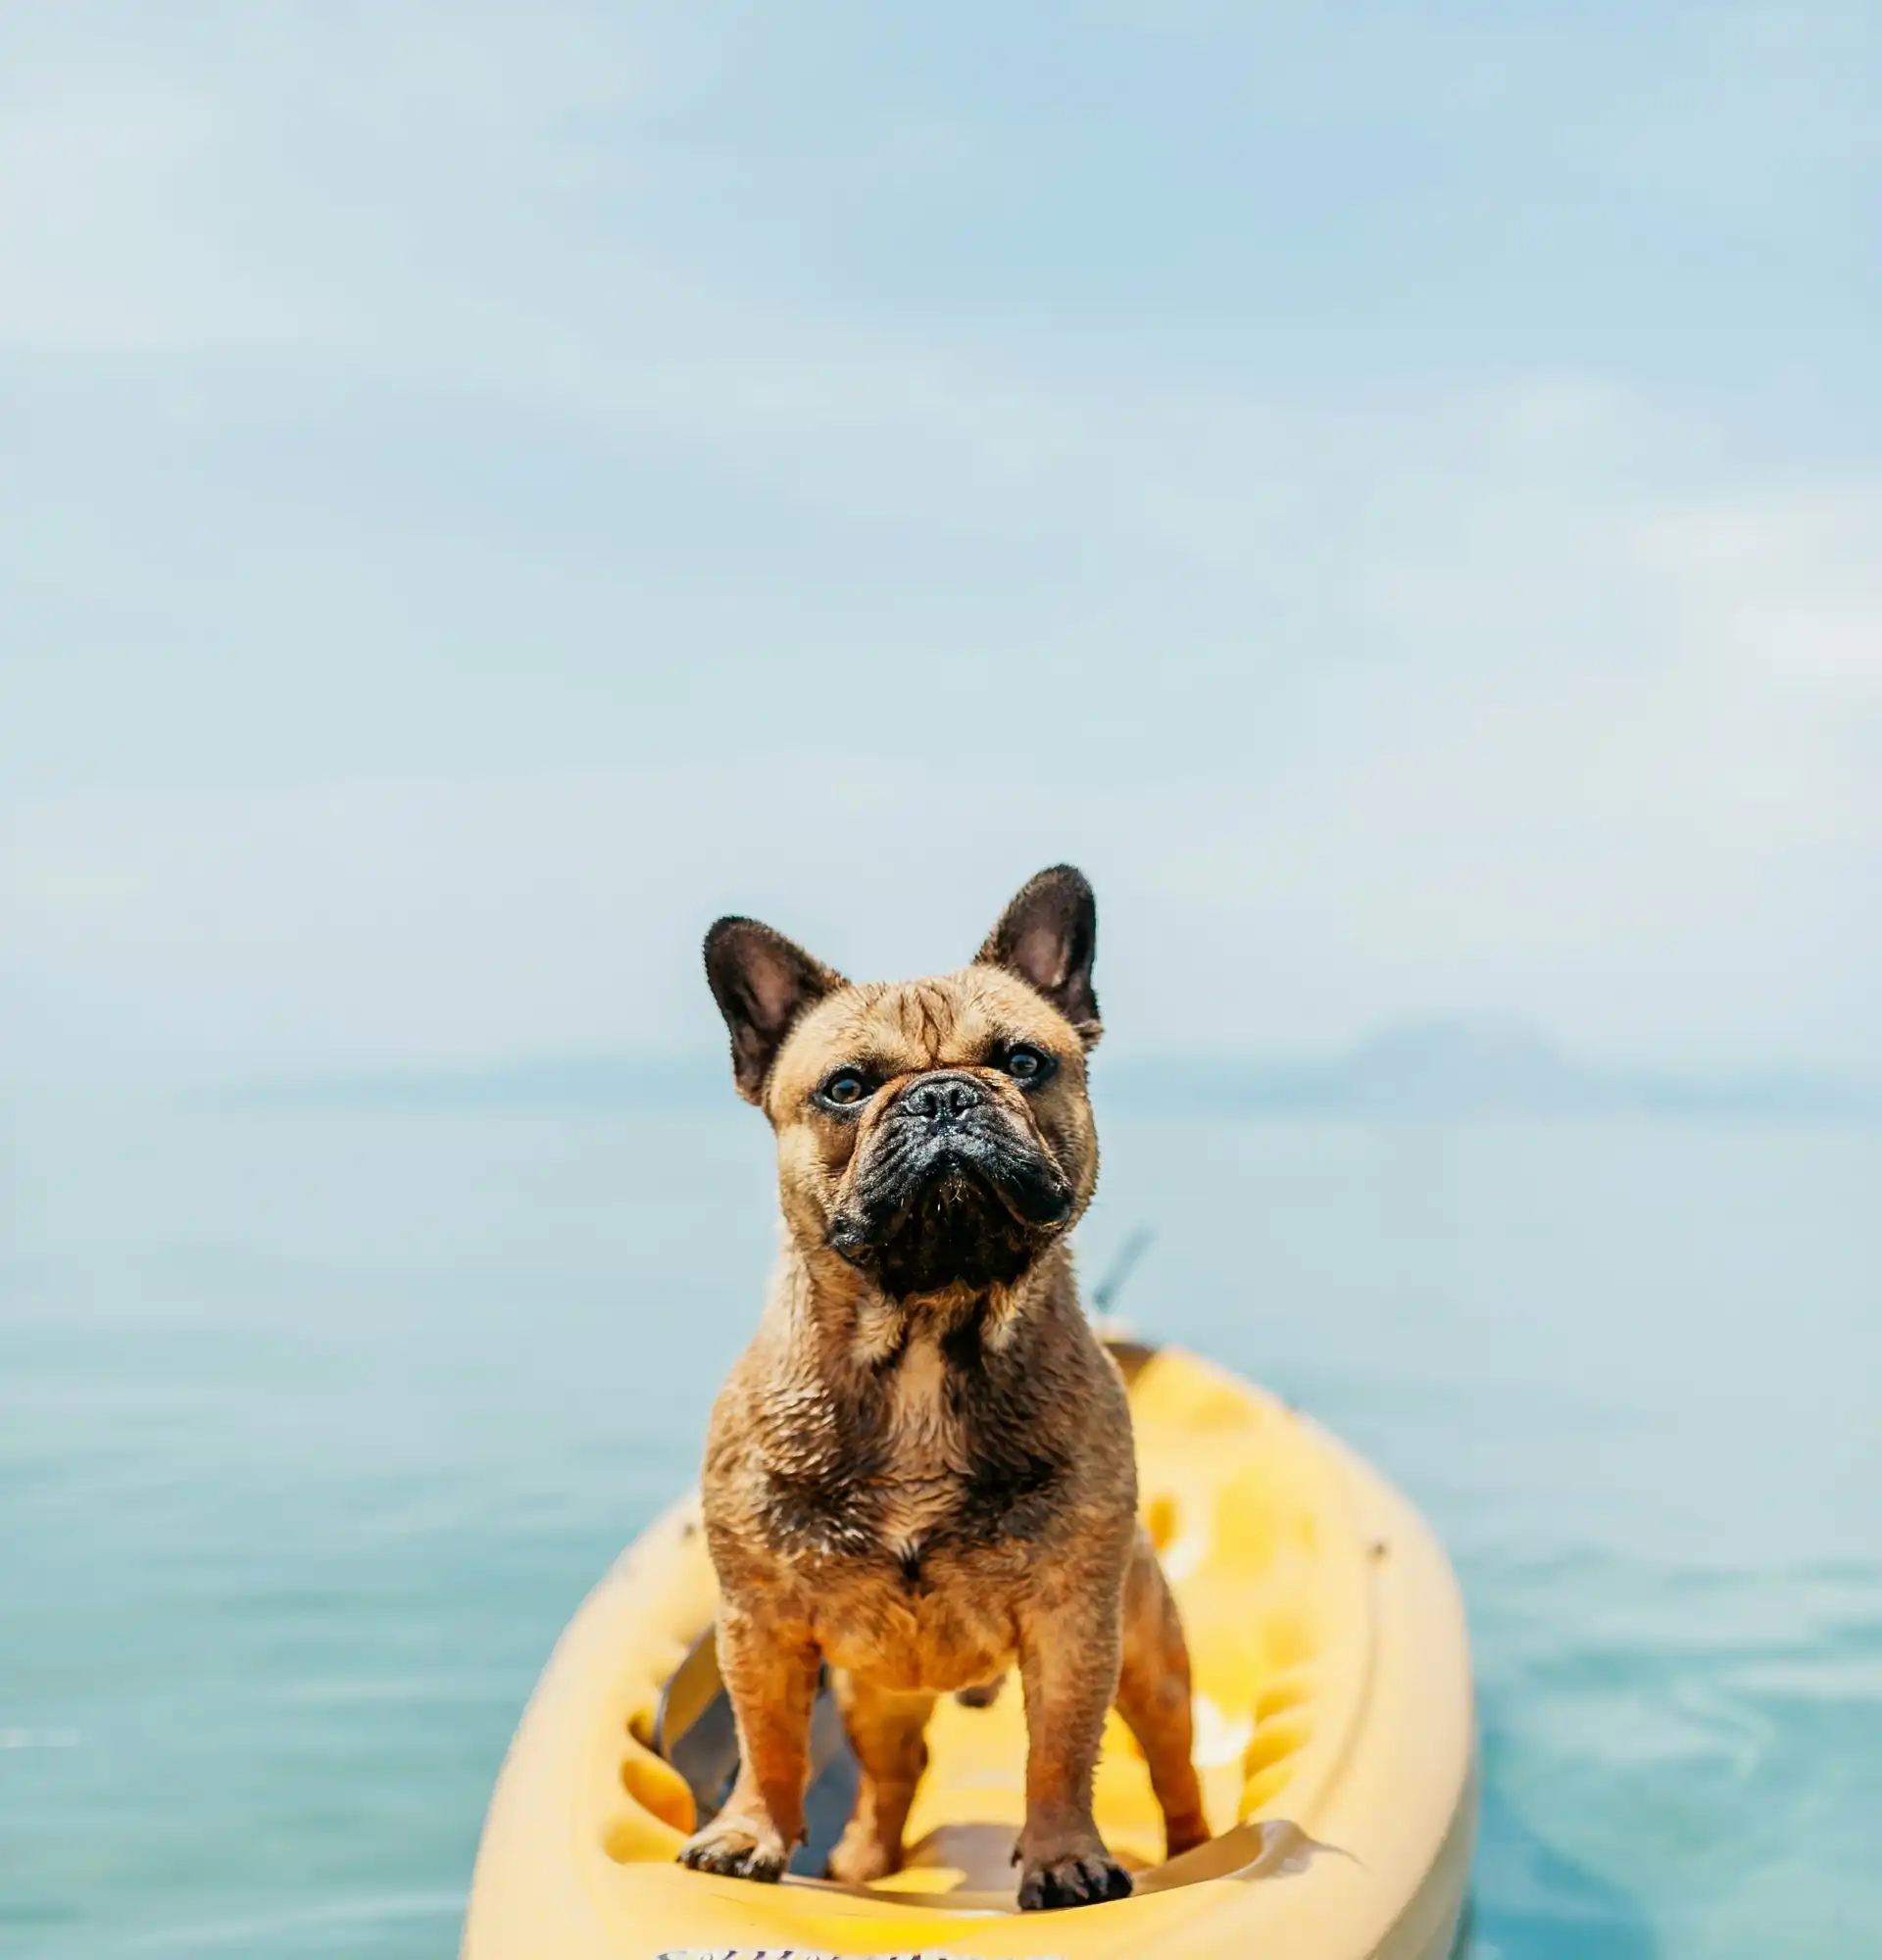 Keeping Dogs Cool While RVing